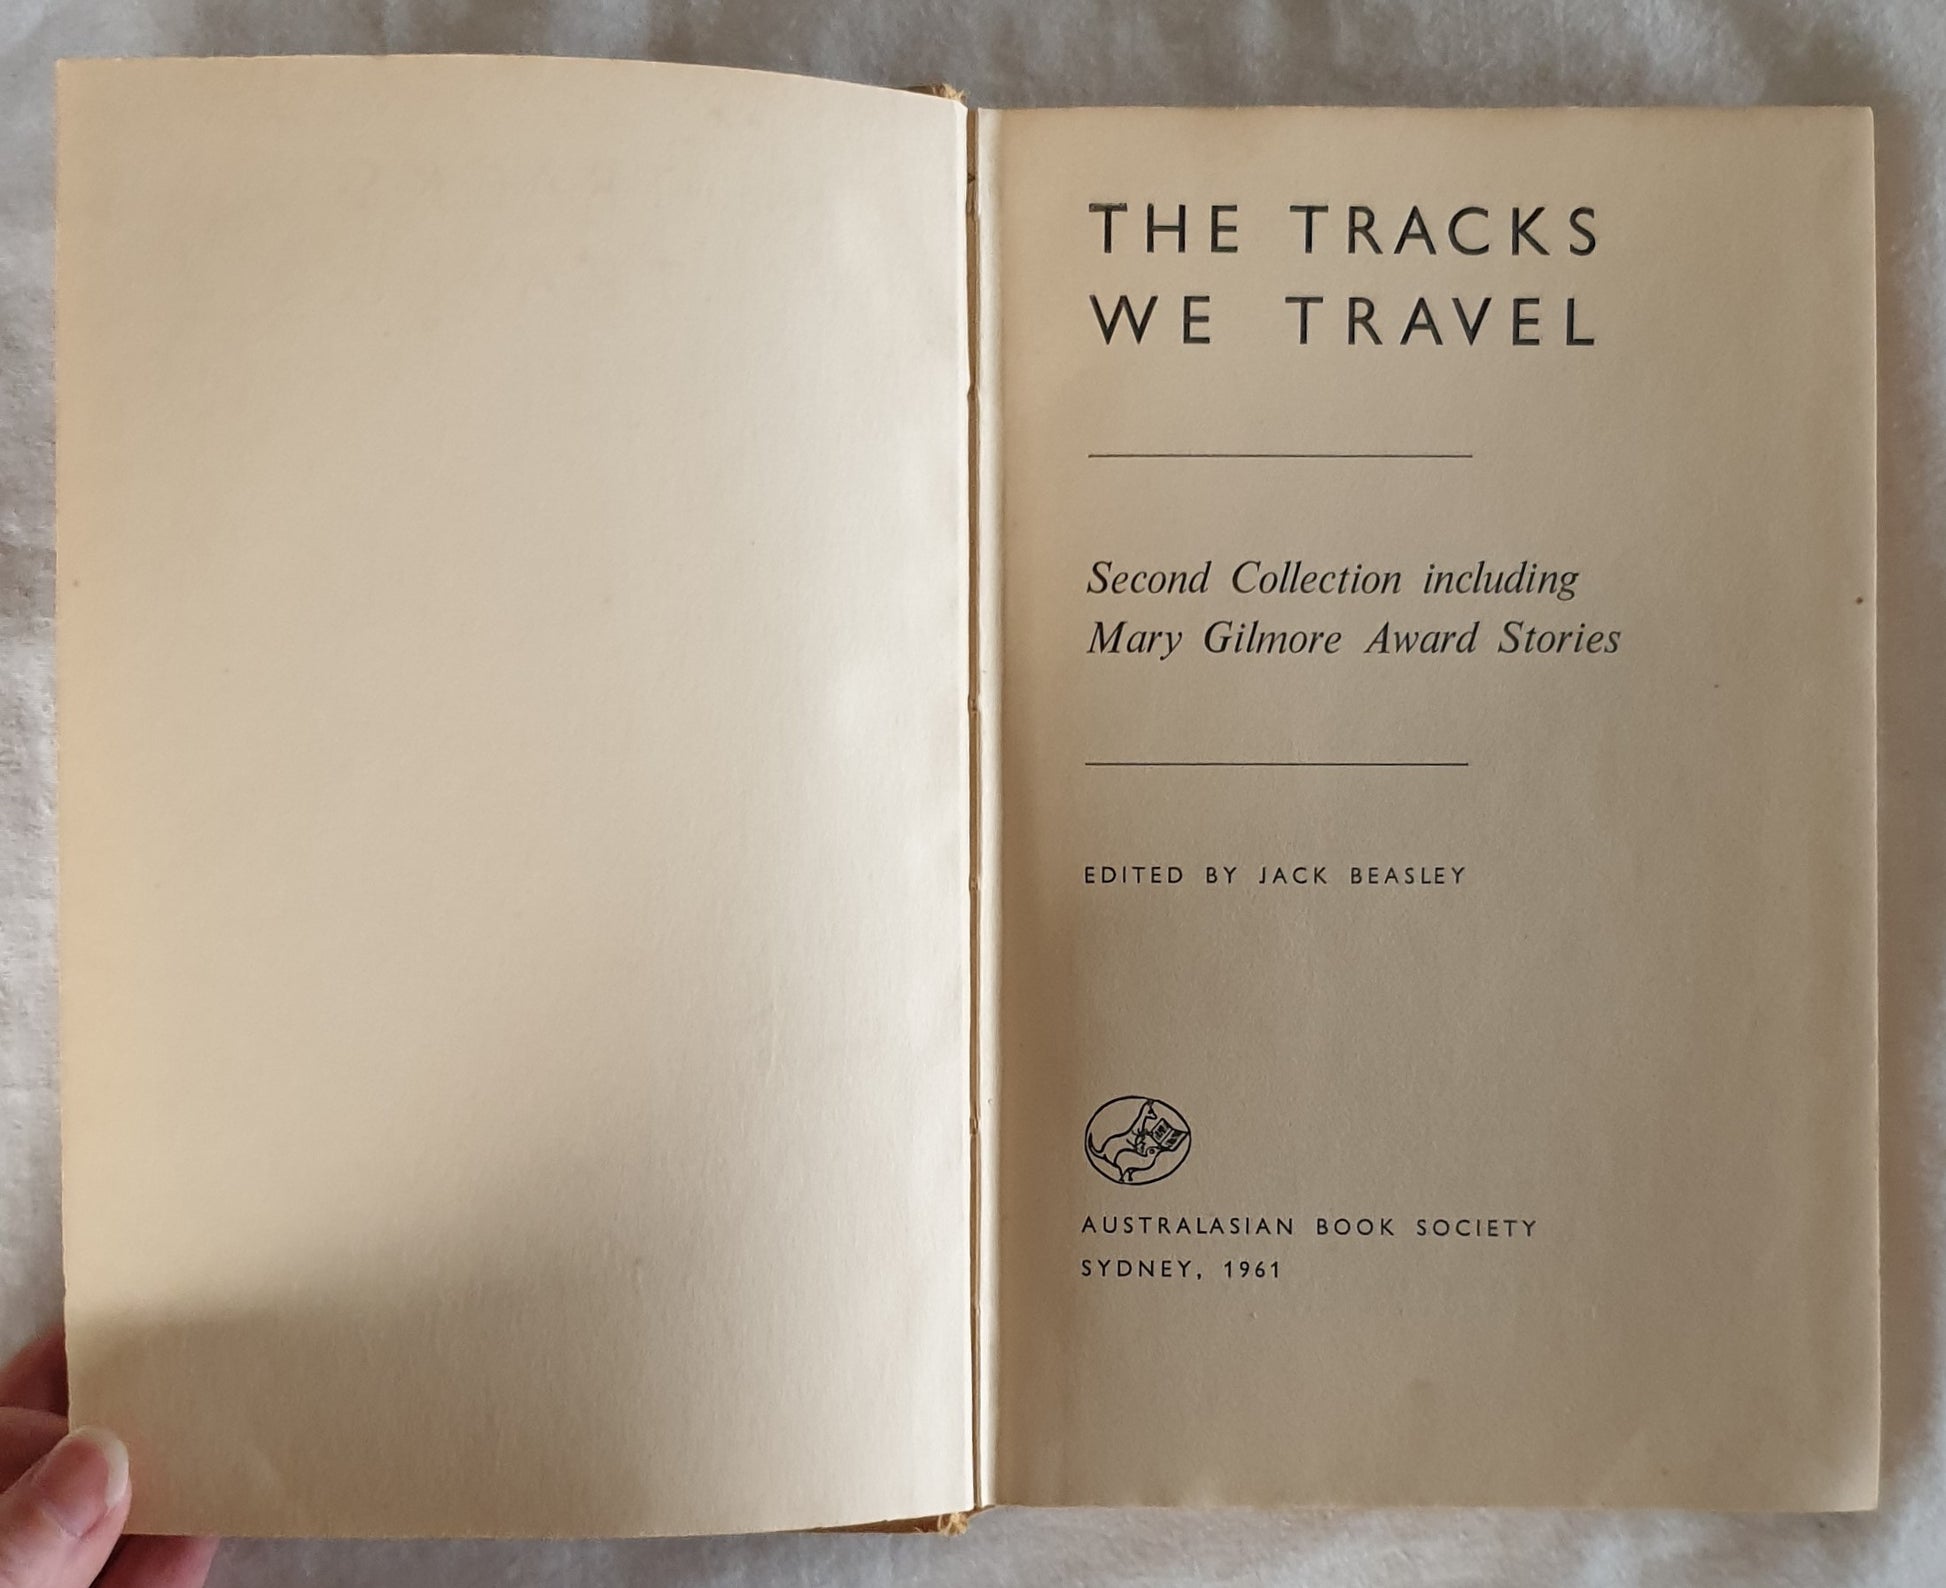 The Tracks We Travel by Jack Beasley